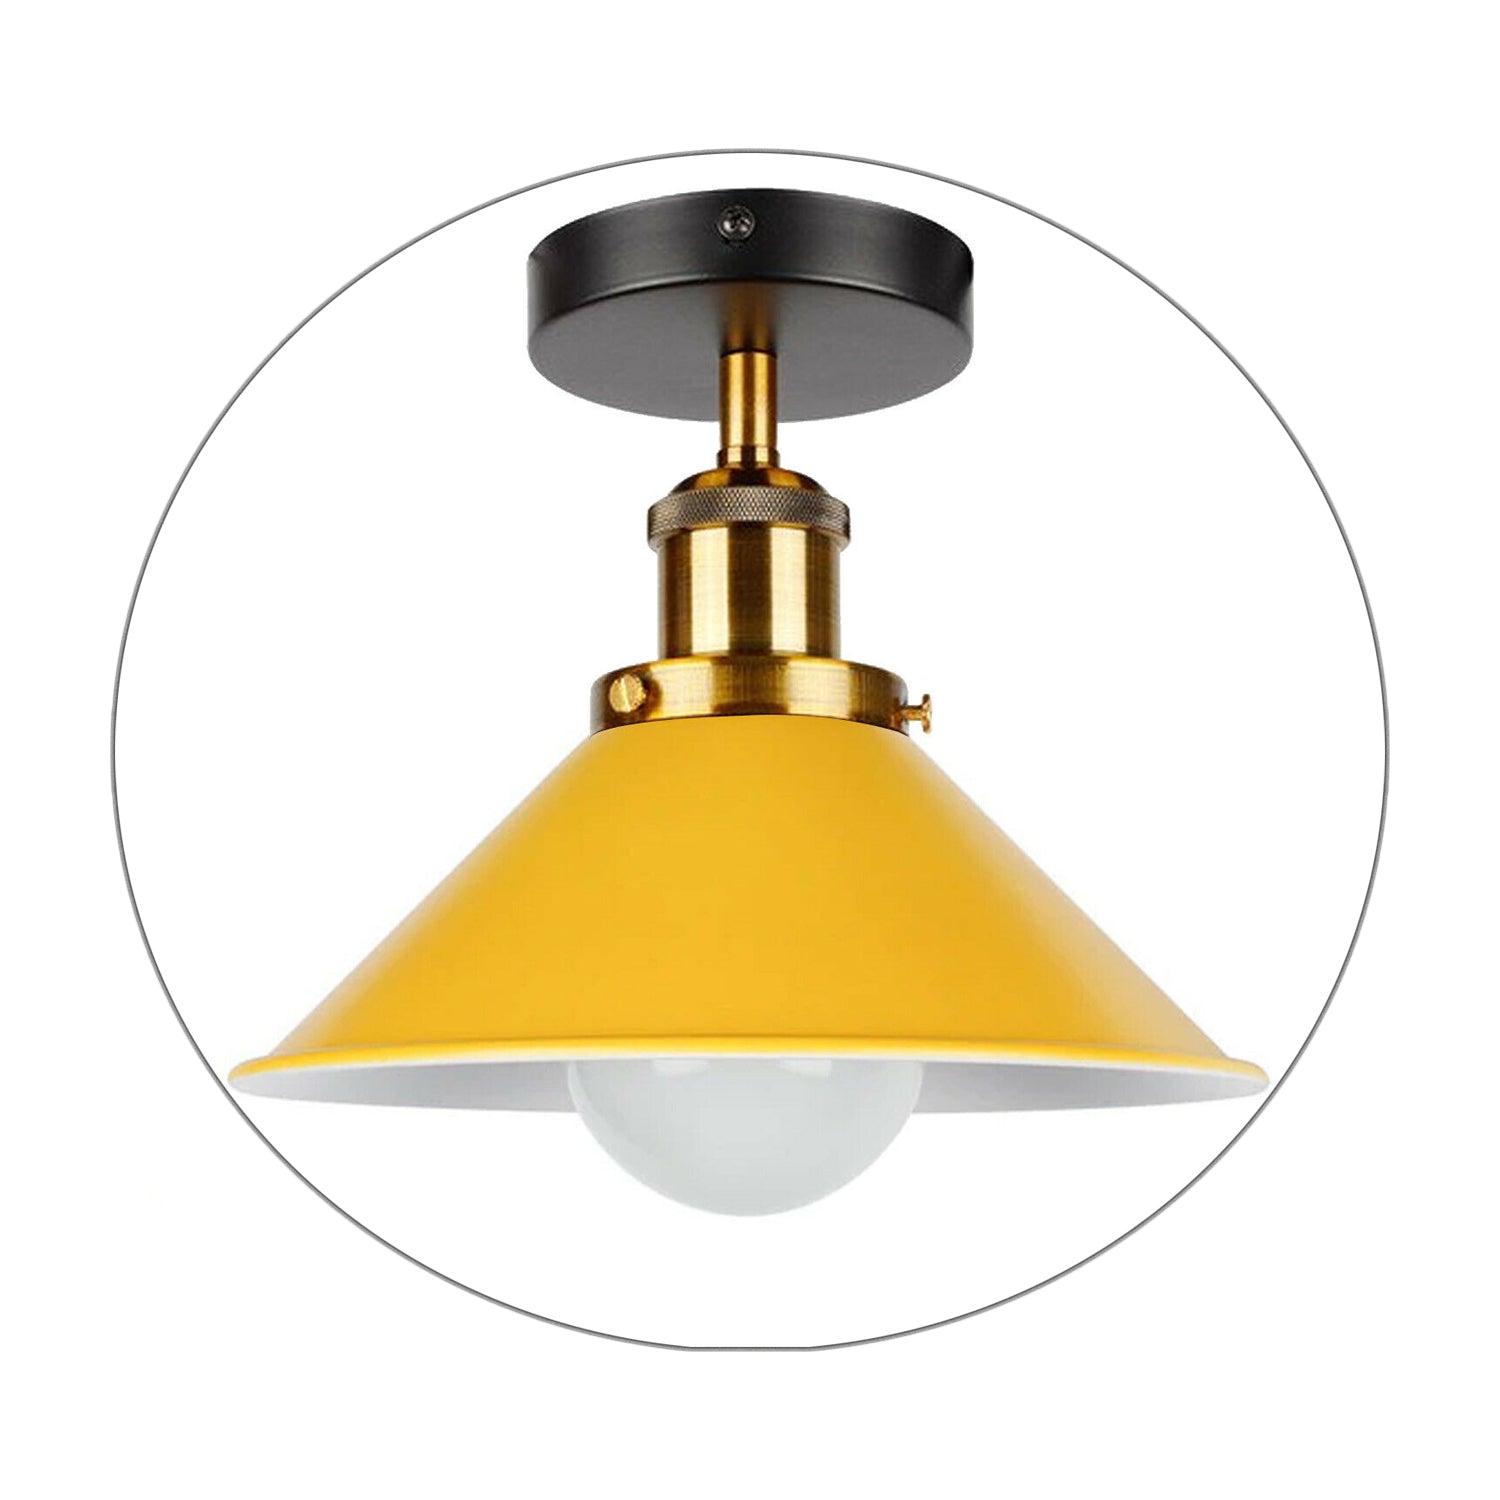  Living Room Yellow Ceiling Lamp